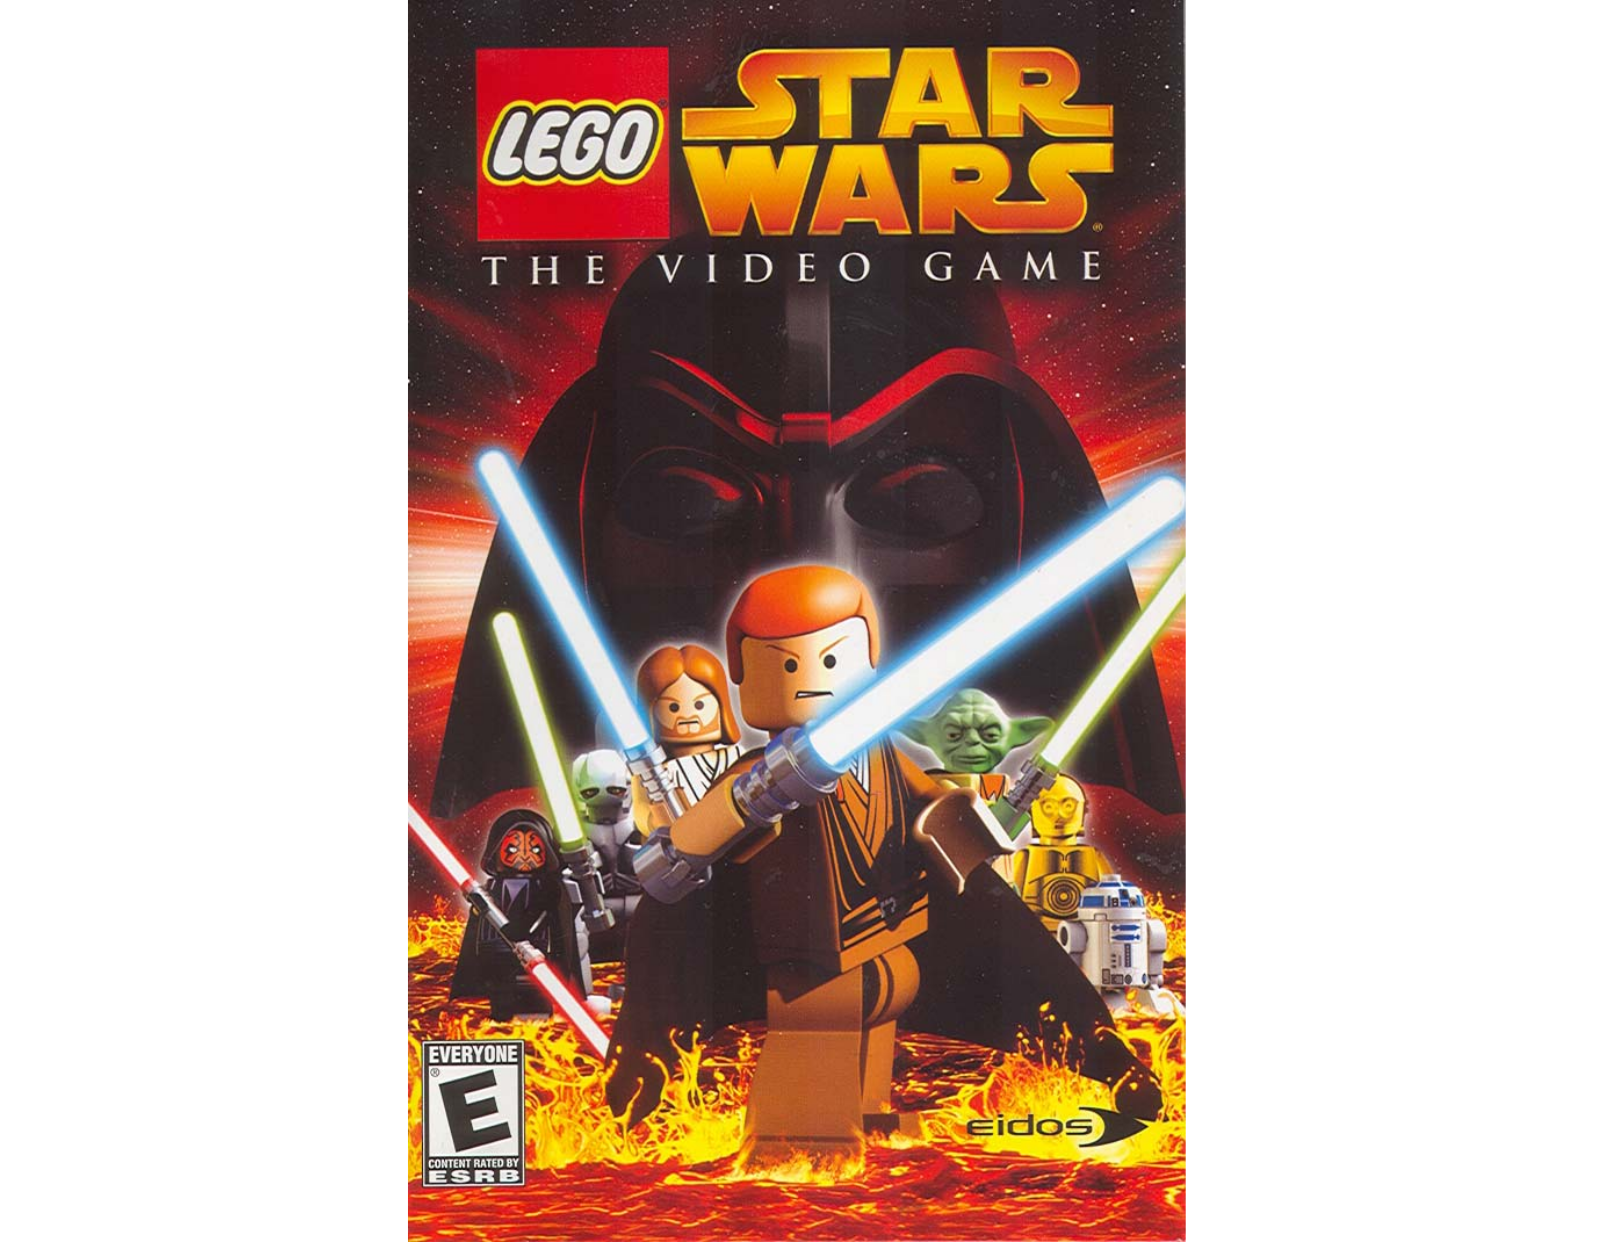 Games PS2 LEGO-STAR WARS-THE VIDEO GAME User Manual